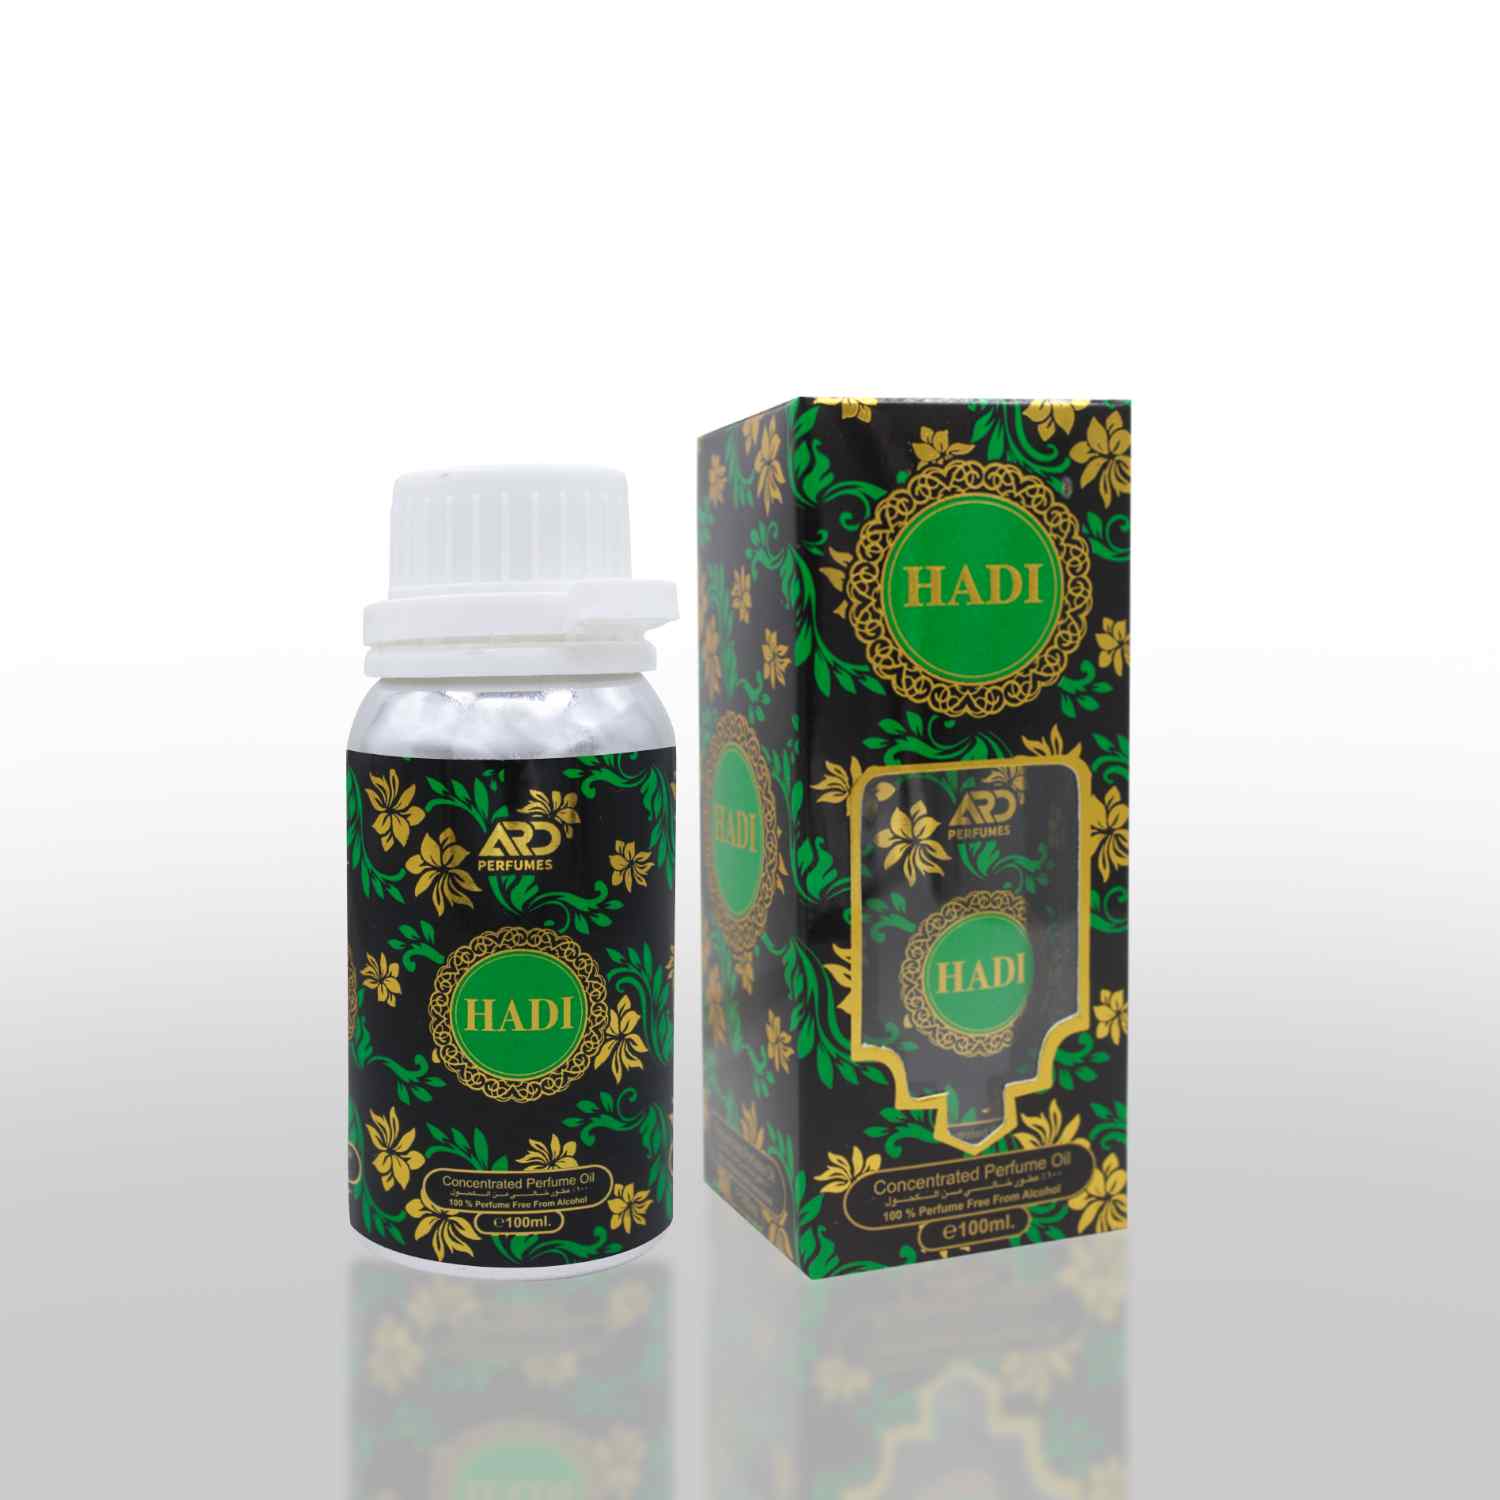 Hadi 100ml concentrated perfume oil